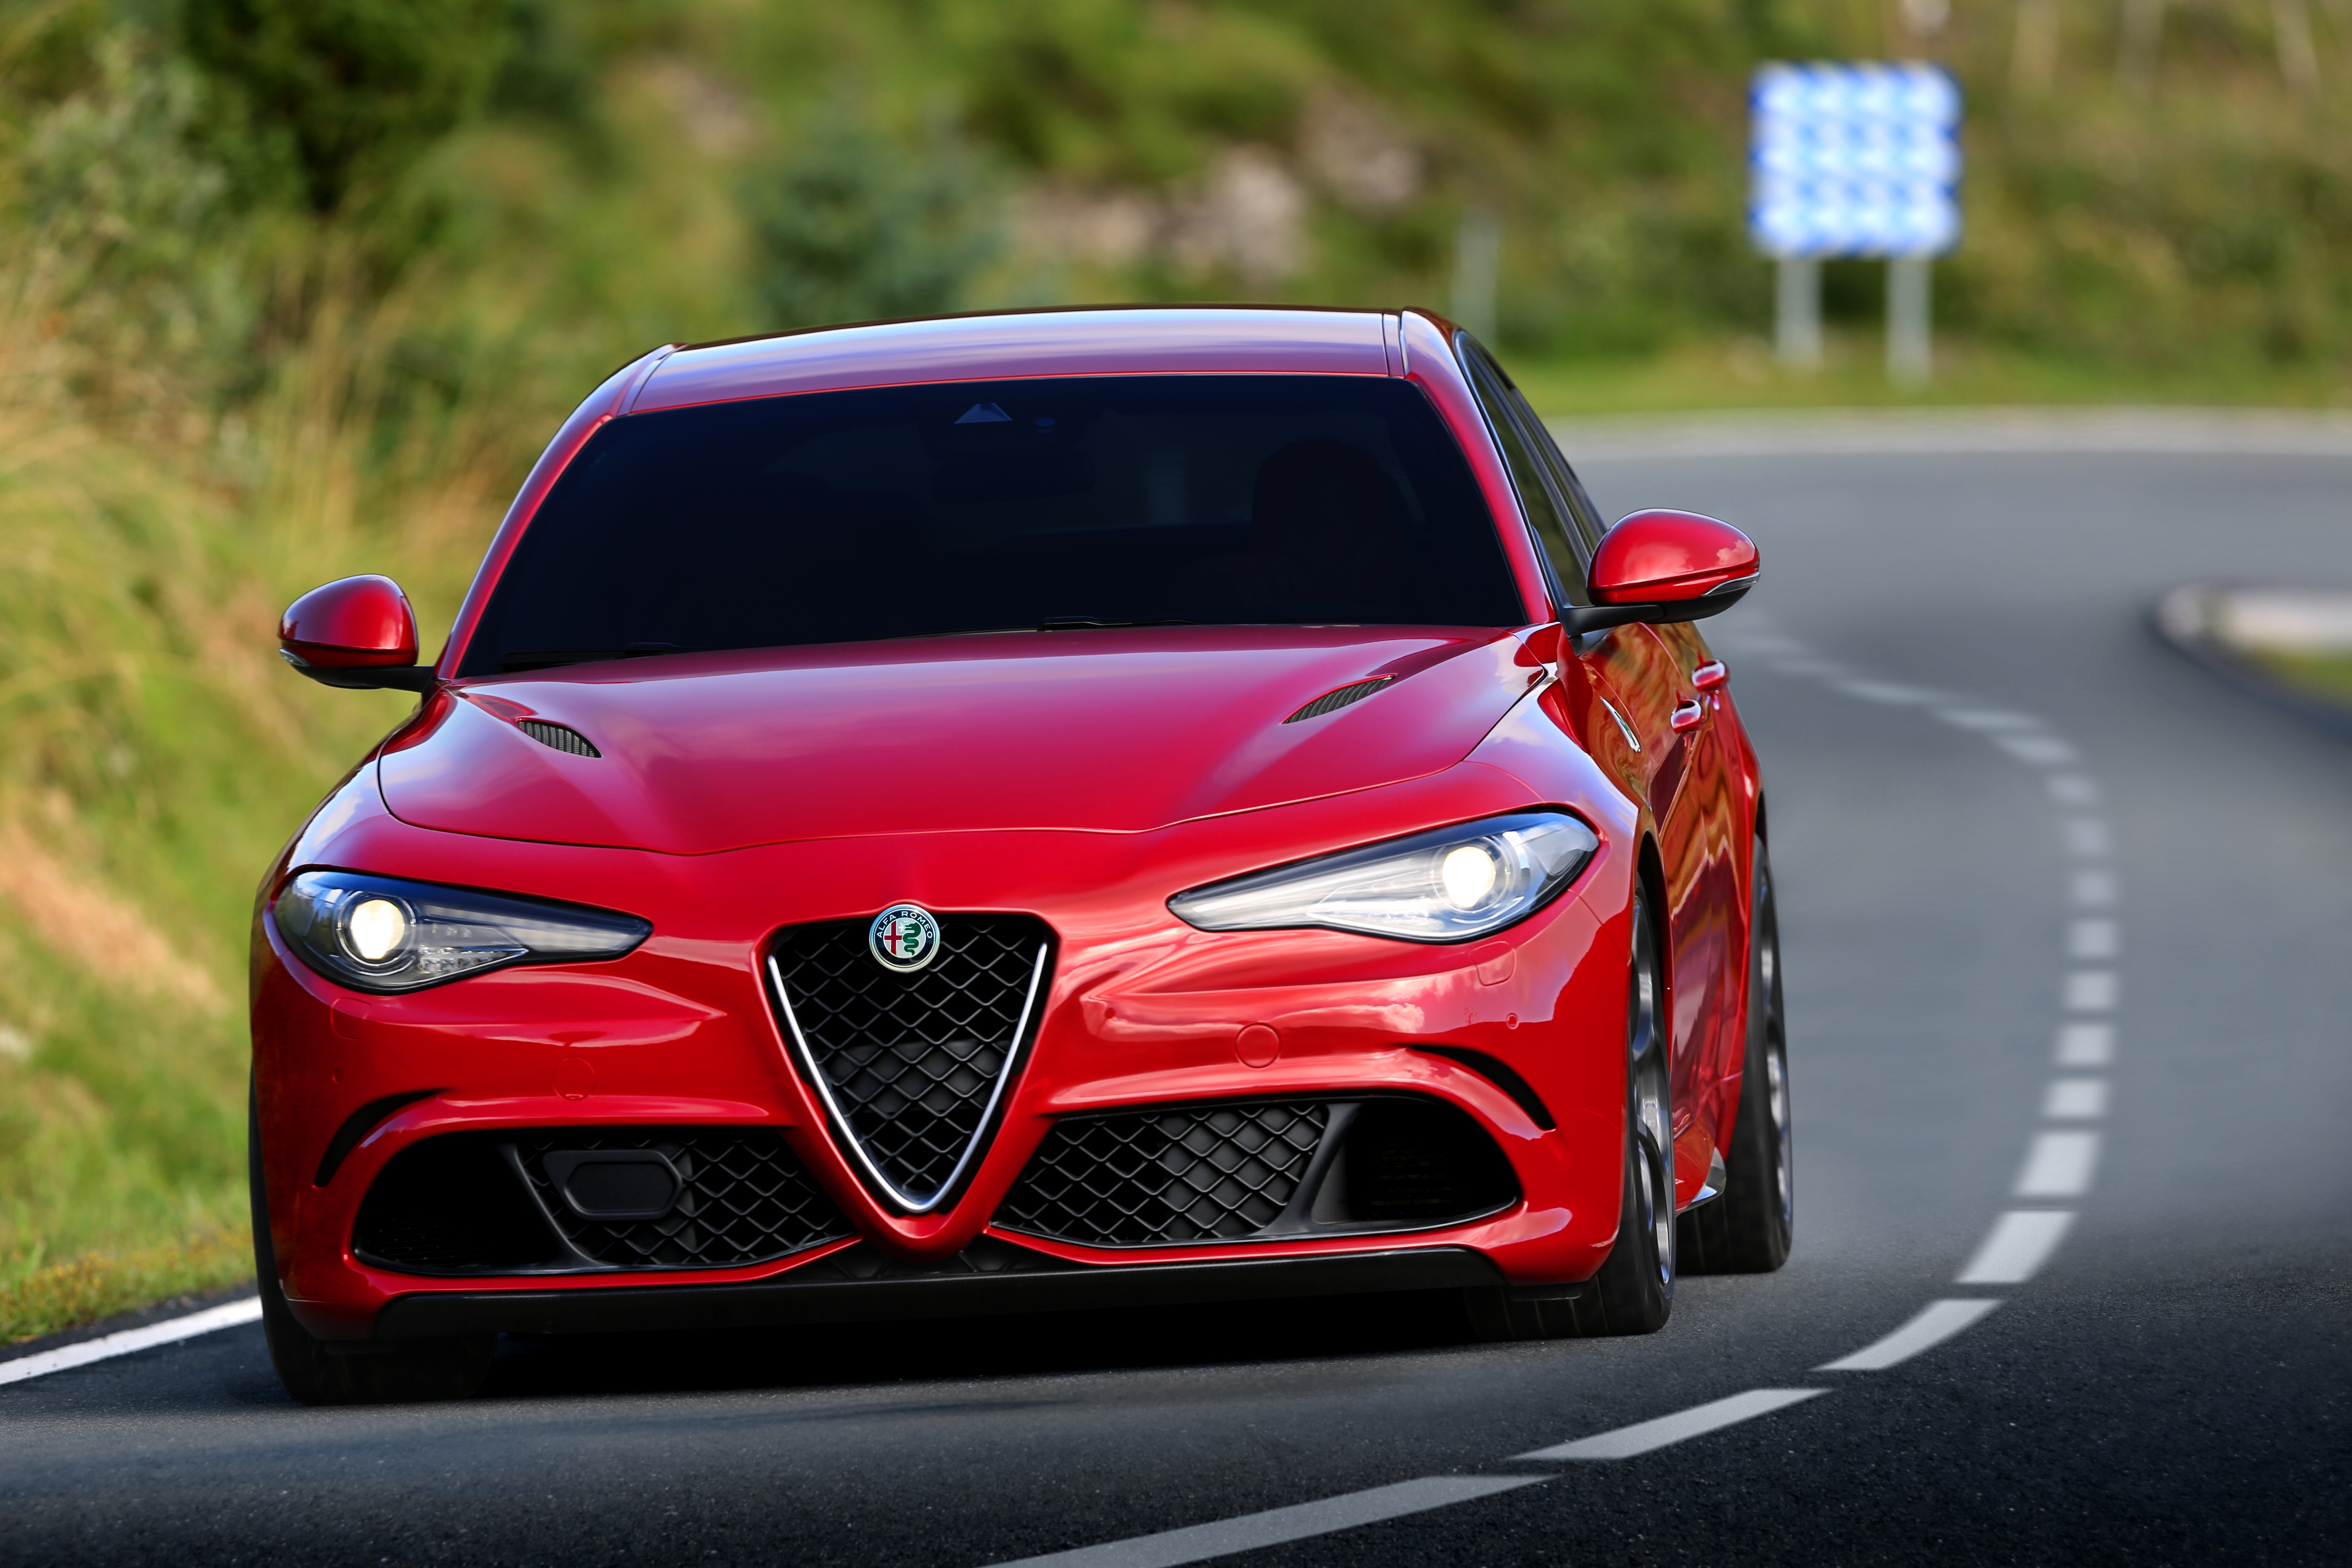 Does Alfa Romeo have a chance with its hot new Giulia?